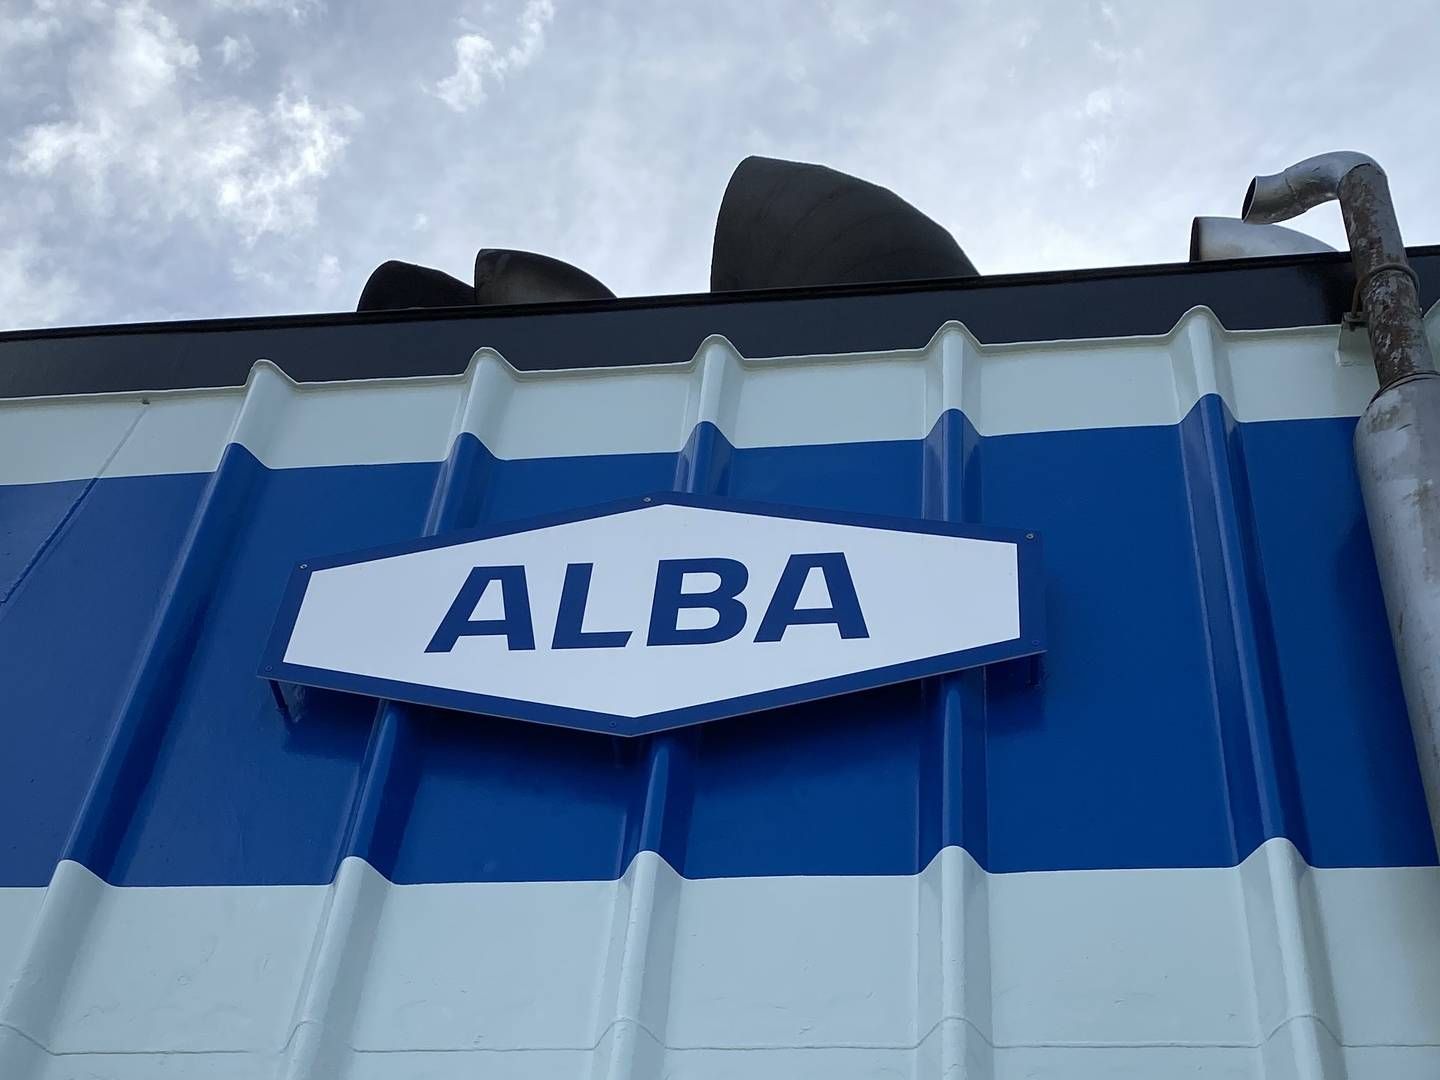 Alba Tankers is headquartered in Aalborg, Denmark and was created as an independent company following the bankruptcy of OW Bunker in 2014. | Photo: Alba Tankers